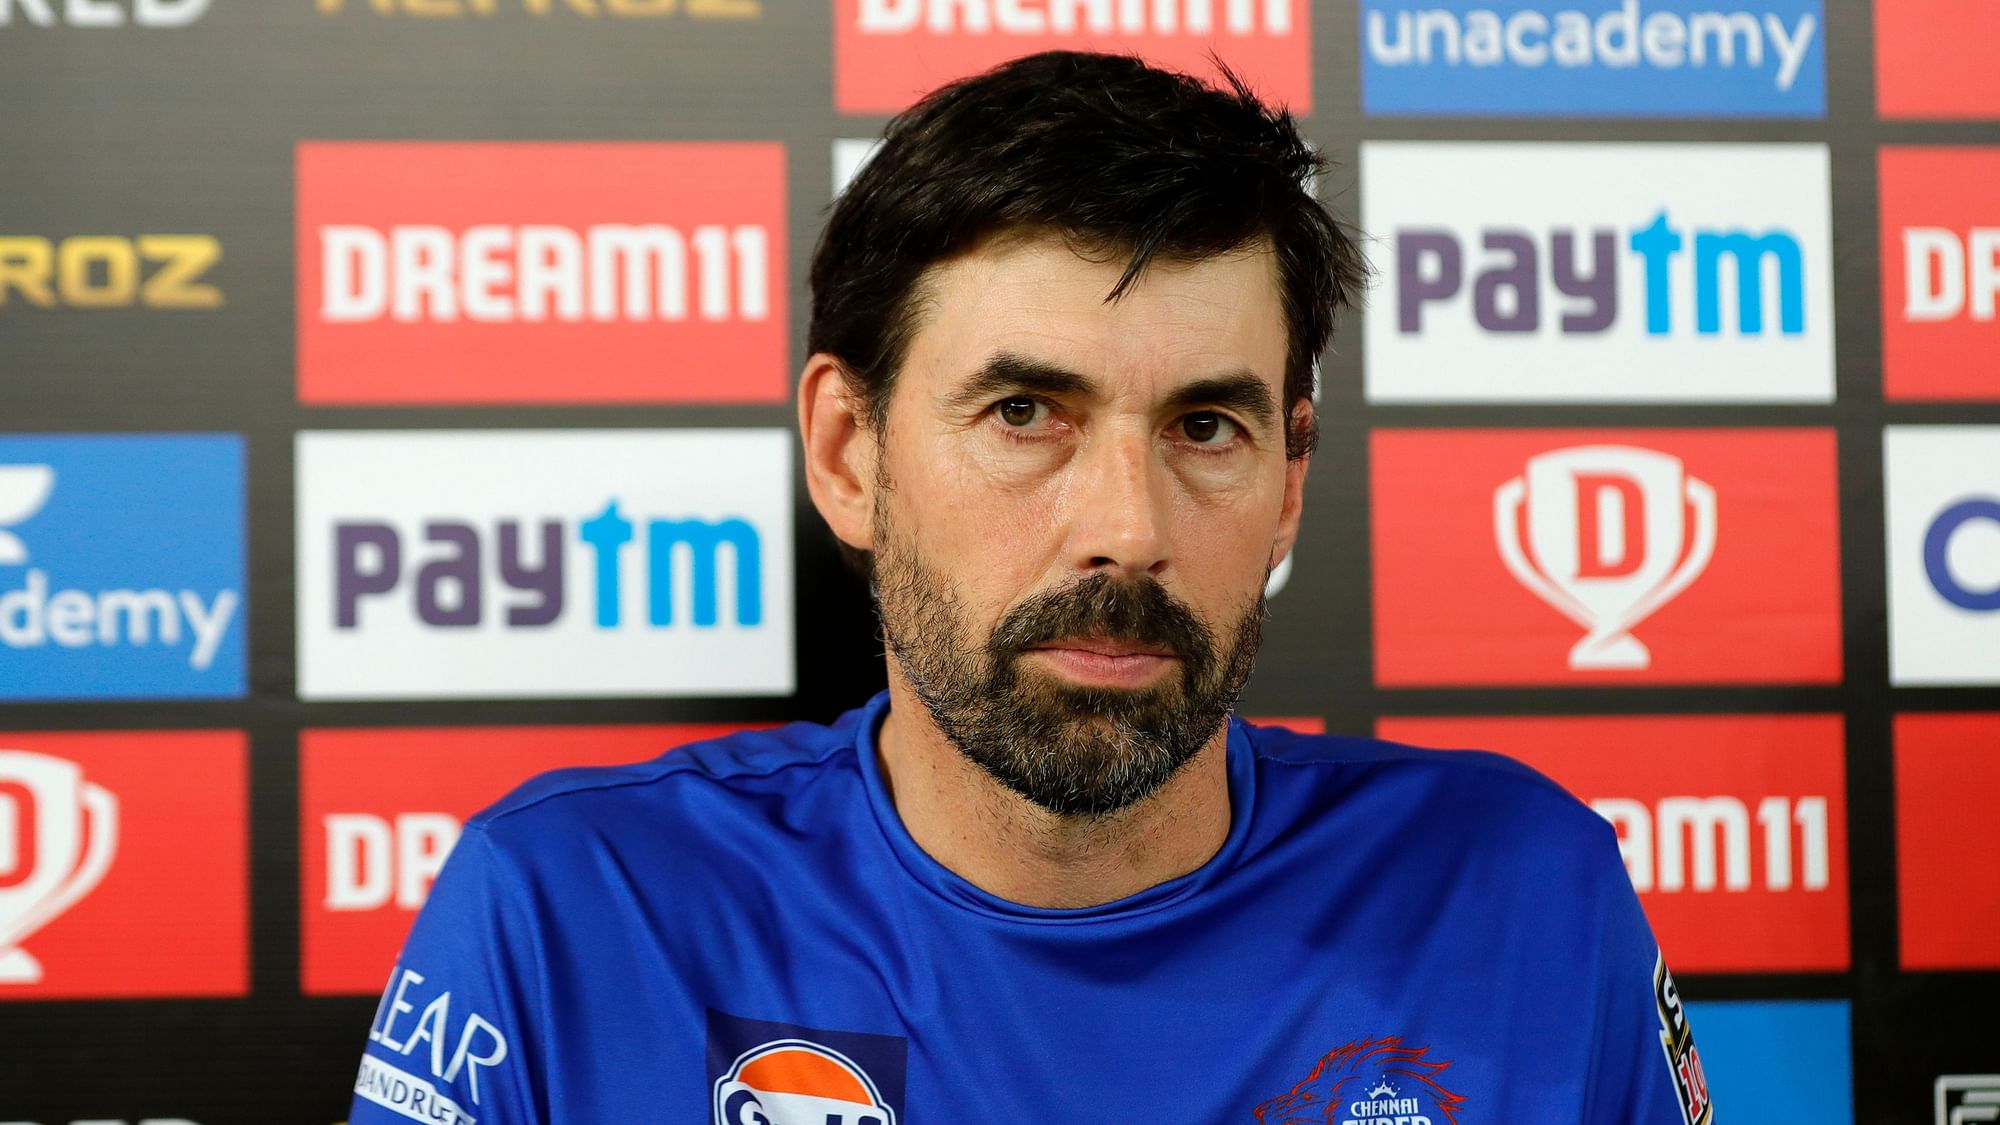 CSK Coach Stephen Fleming explains why Sam Curran opened for CSK and Shane Watson came at number 3.